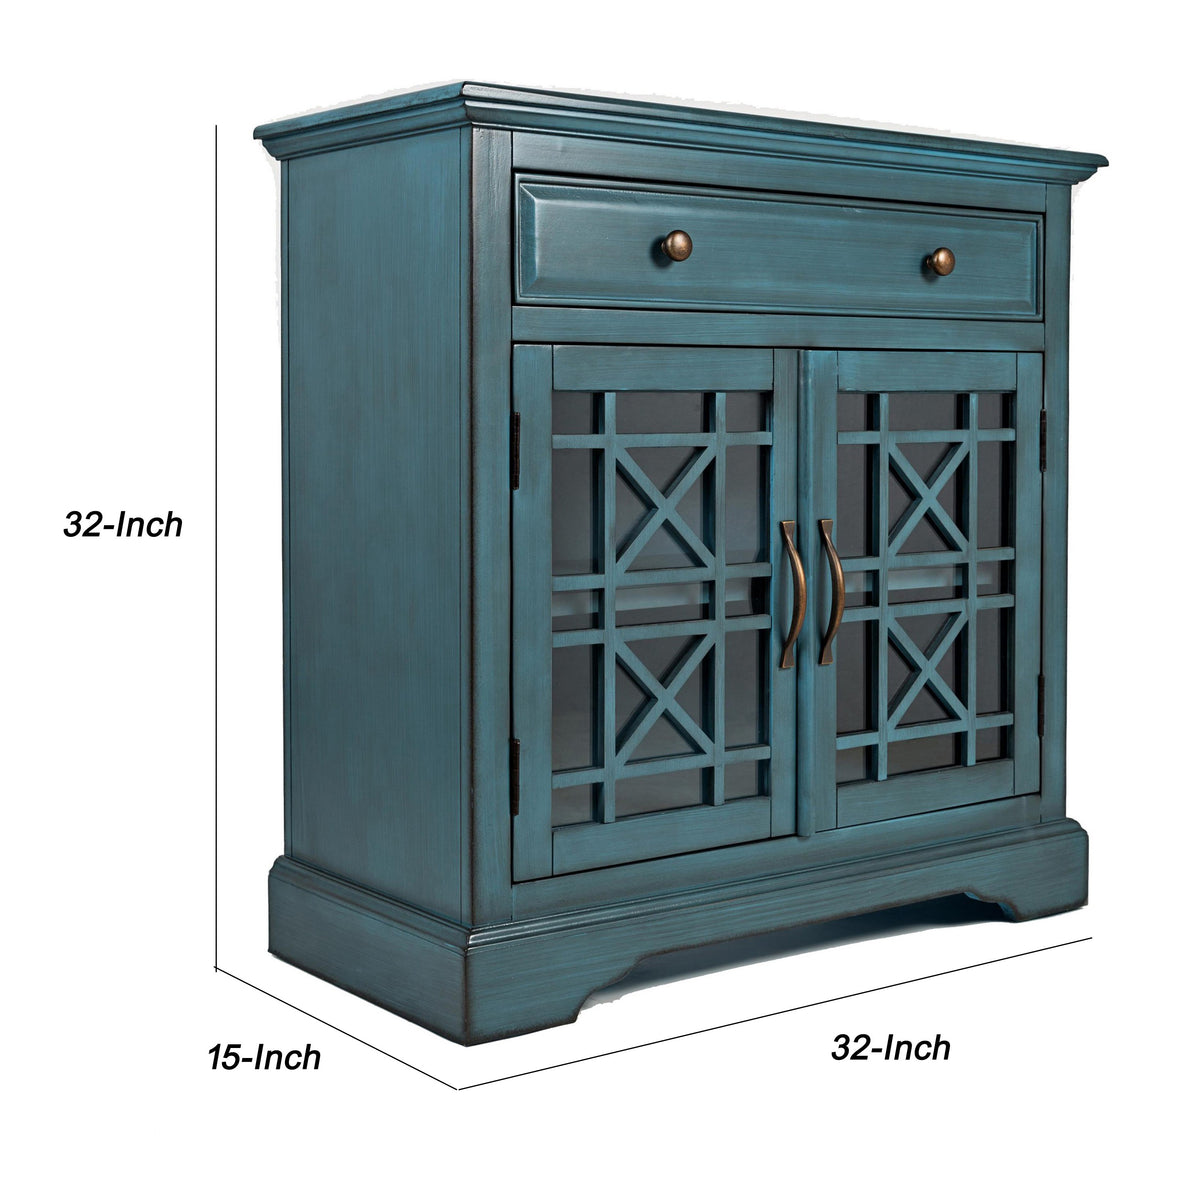 Koi Series 32 Inch Wooden Accent Cabinet with Fretwork Glass Front, Blue - BM183988